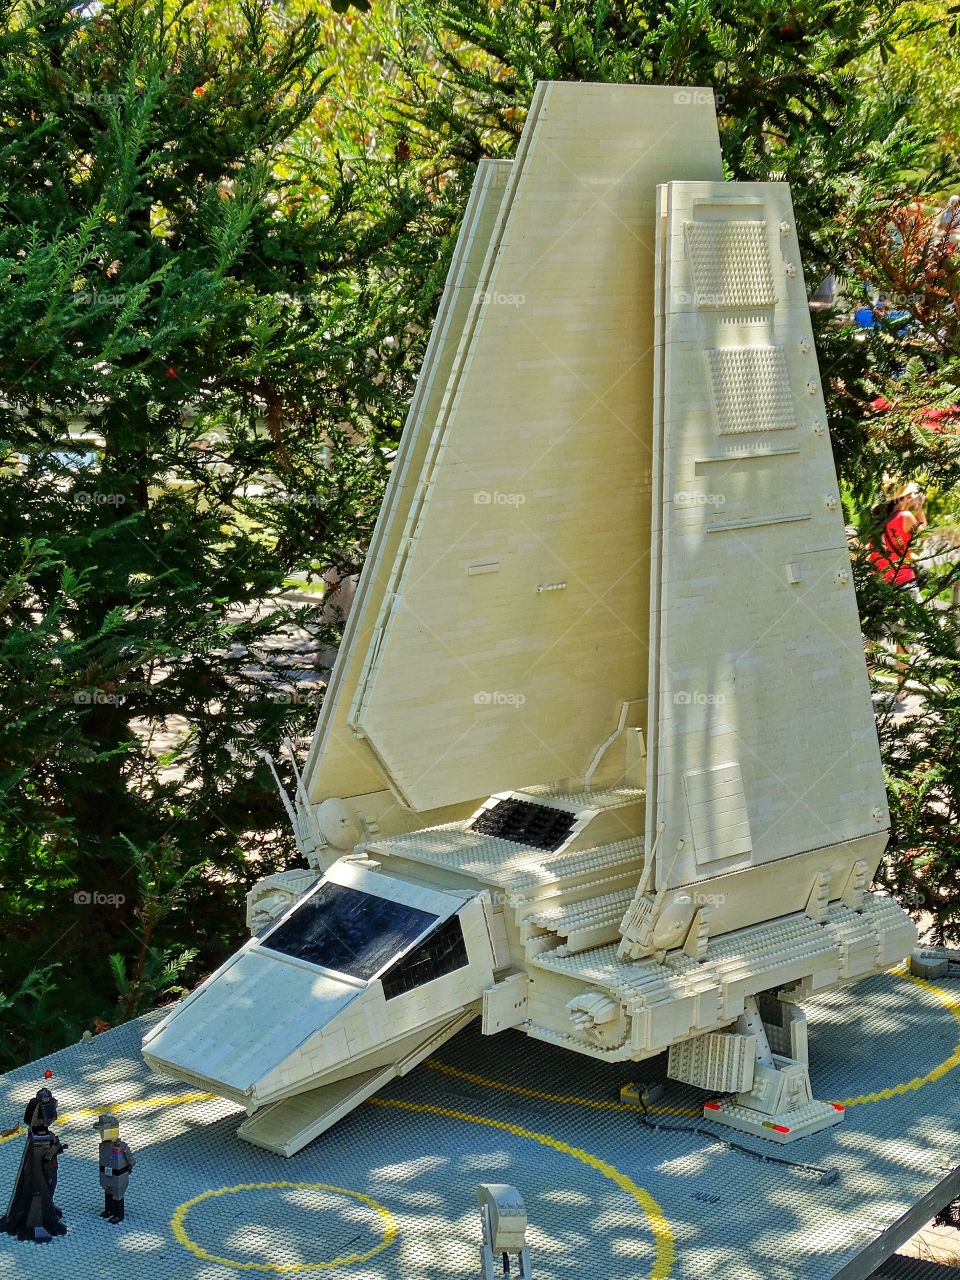 Lego Star Wars Diorama. Lego Diorama Of Stat Wars Imperial Shuttle From Return Of The Jedi
